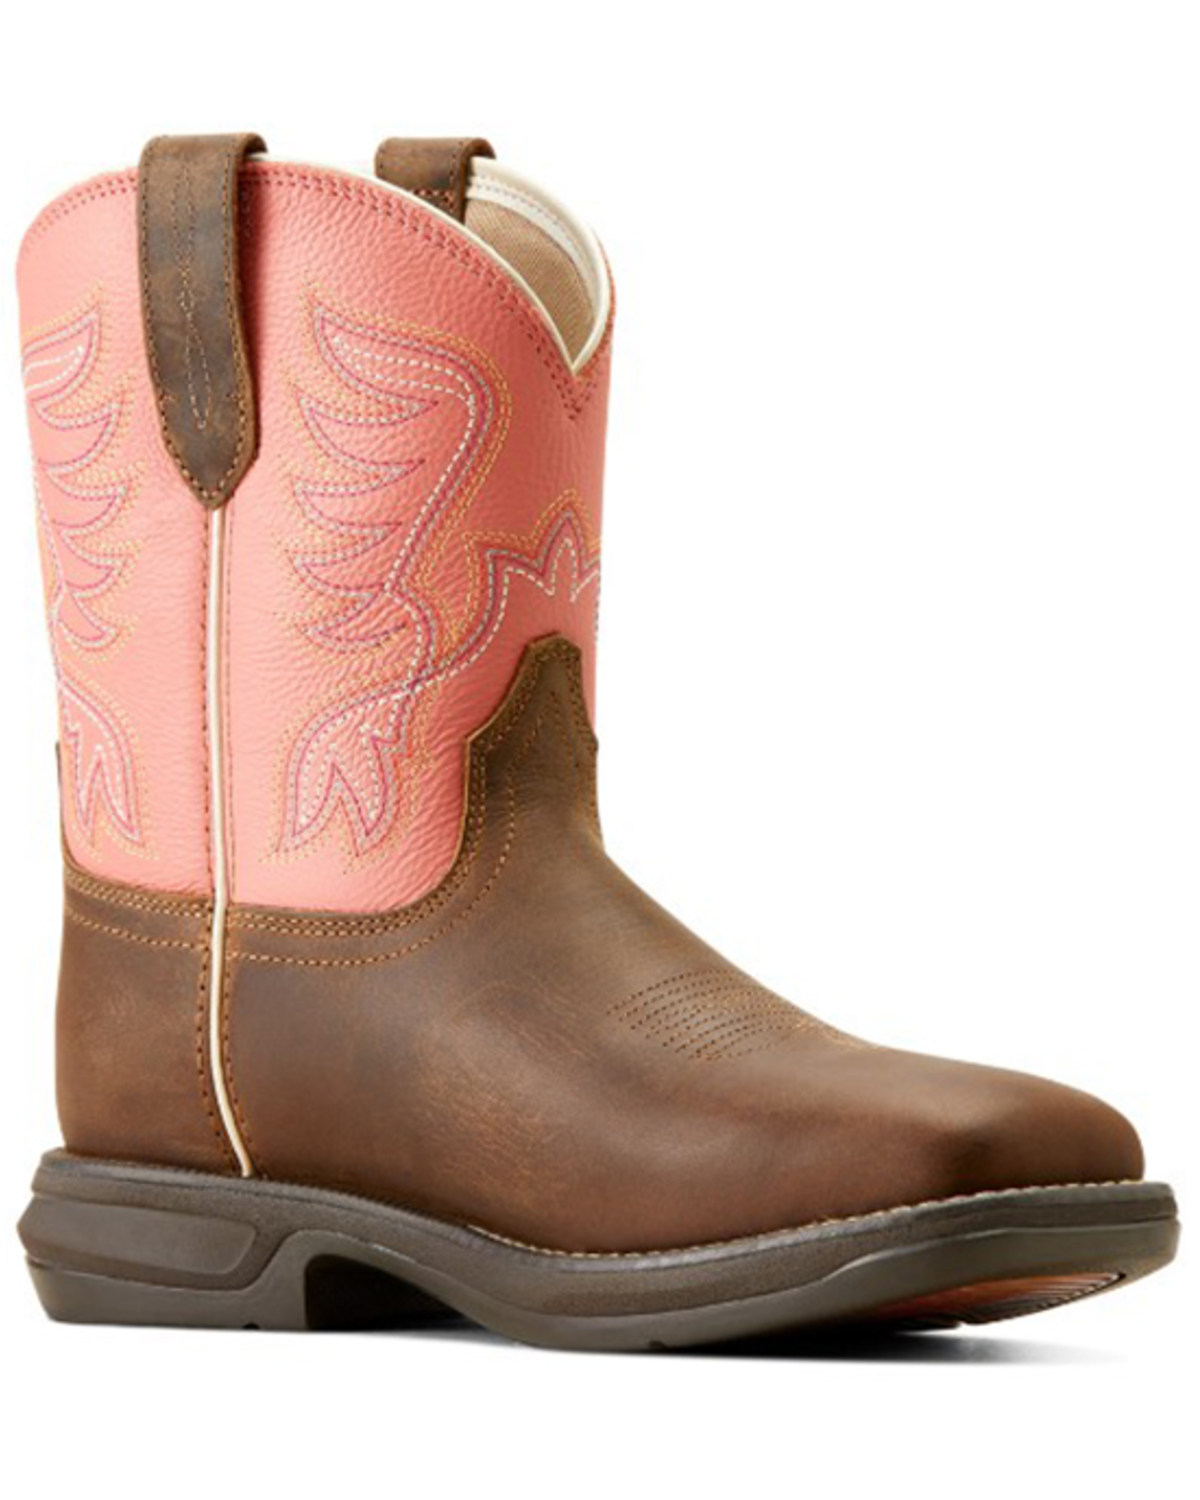 Ariat Women's Anthem Shortie Myra Performance Western Boots - Broad Square Toe